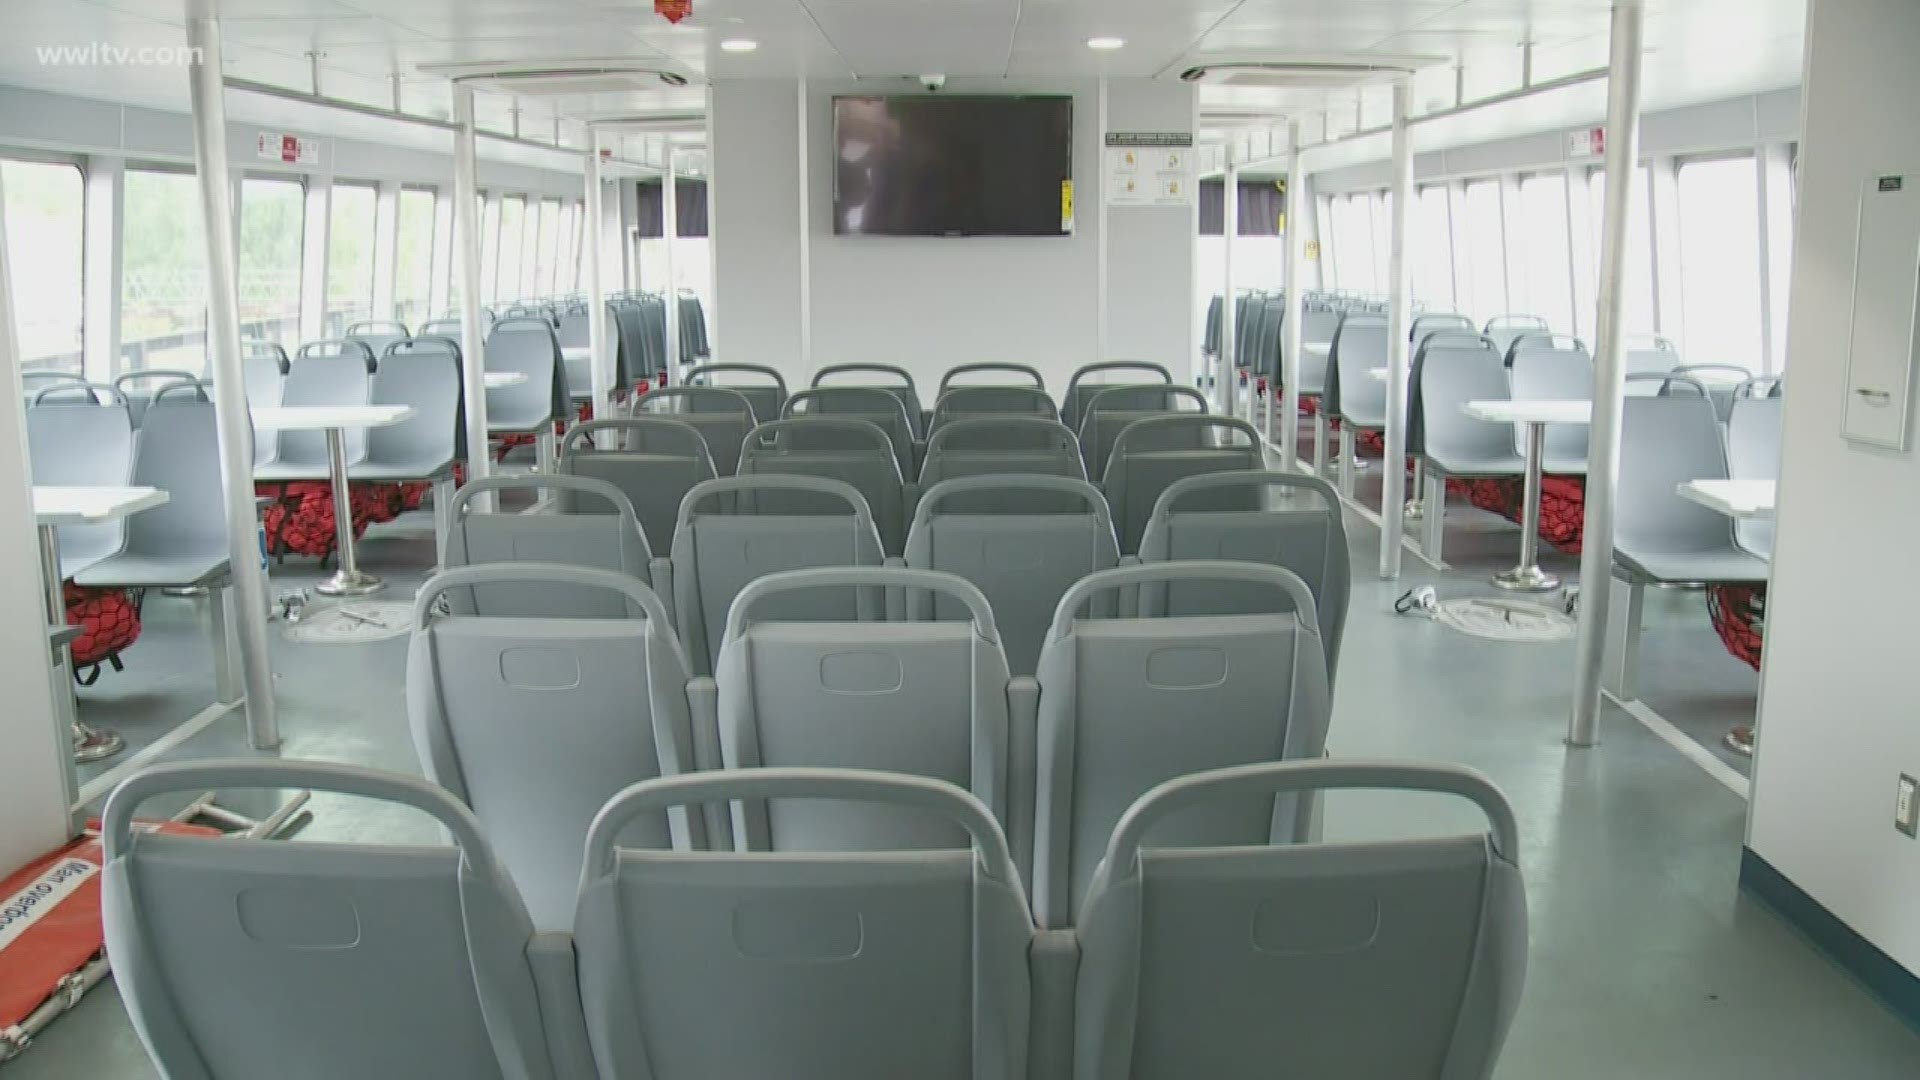 Hopes that the new ferries would soon be carrying passengers across the Mississippi River have been dashed.